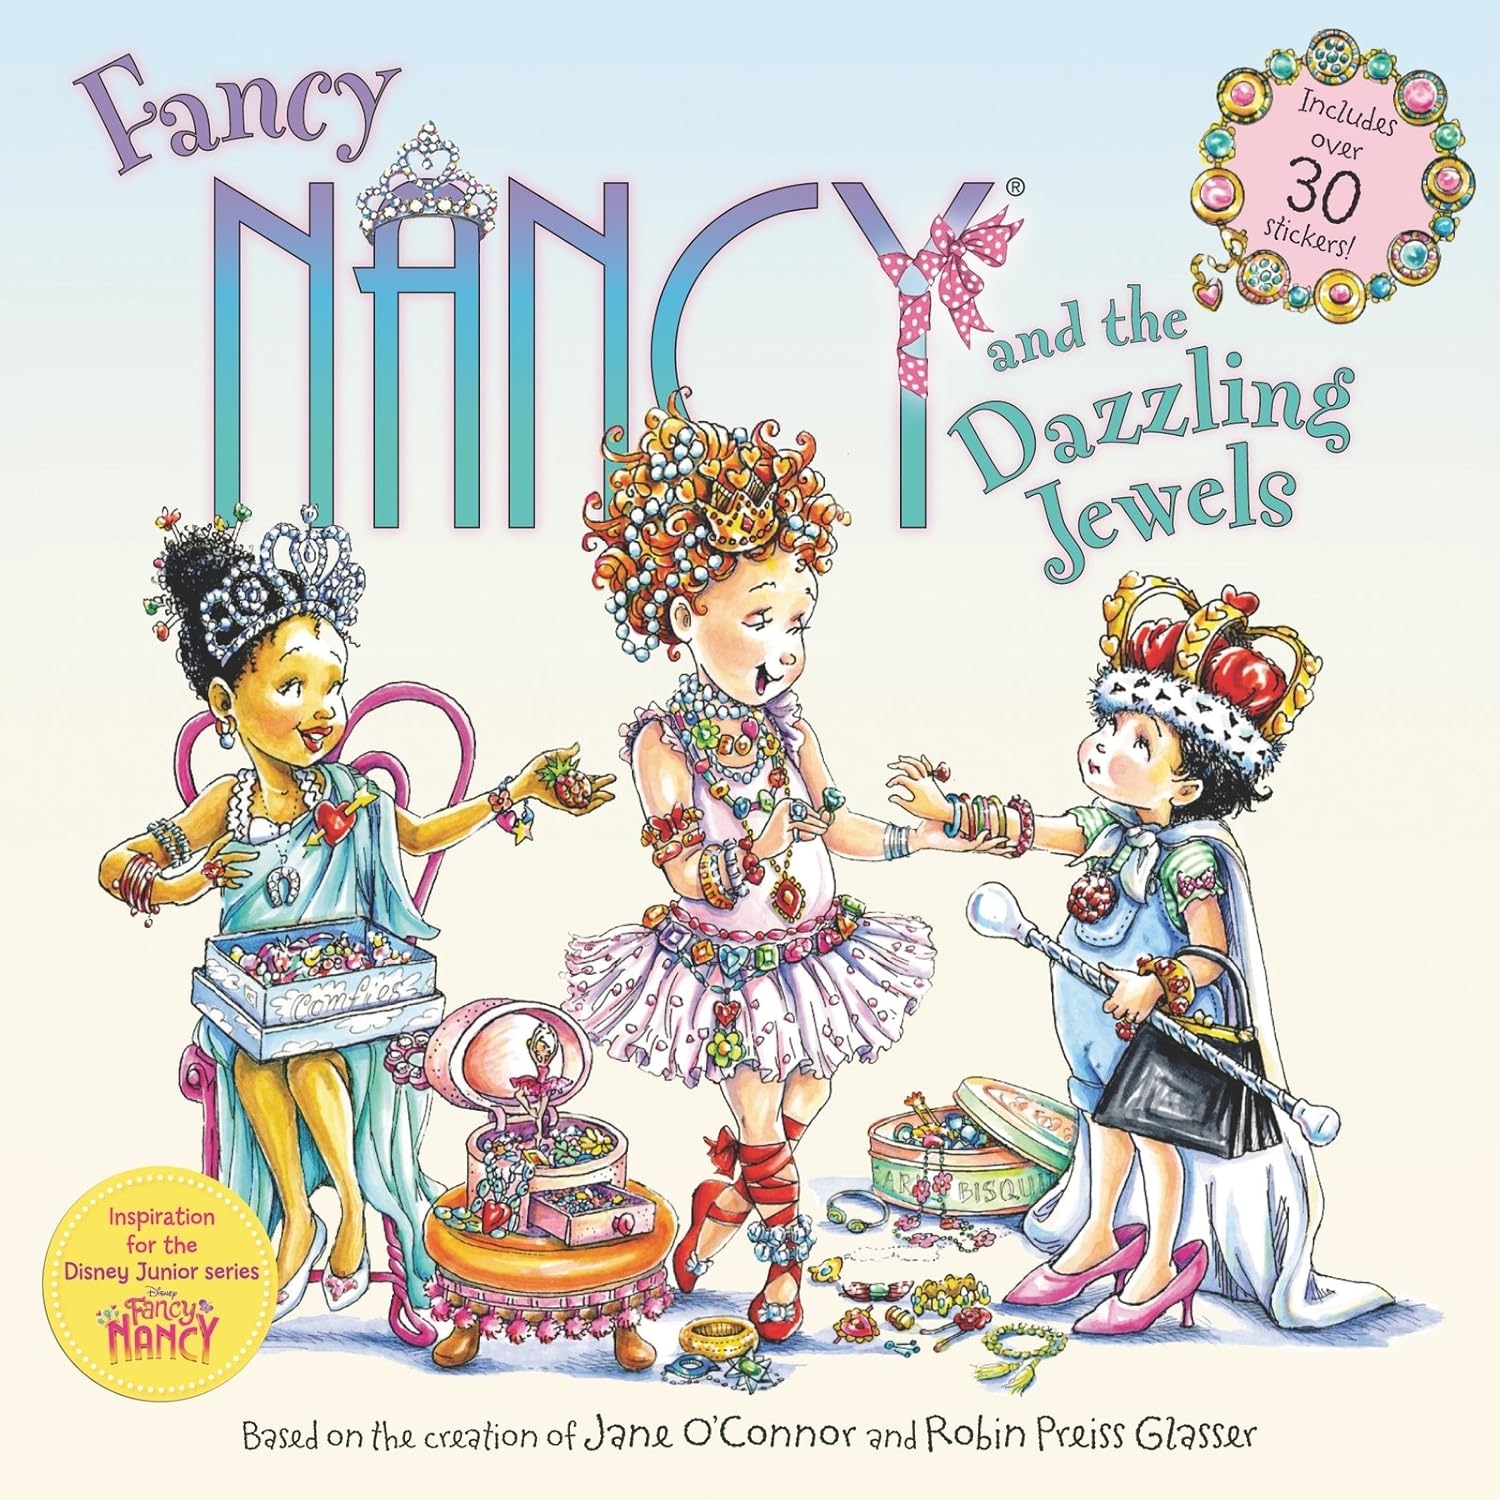 Cover of &quot;Fancy Nancy and the Dazzling Jewels&quot; showing Nancy and friends with jewelry